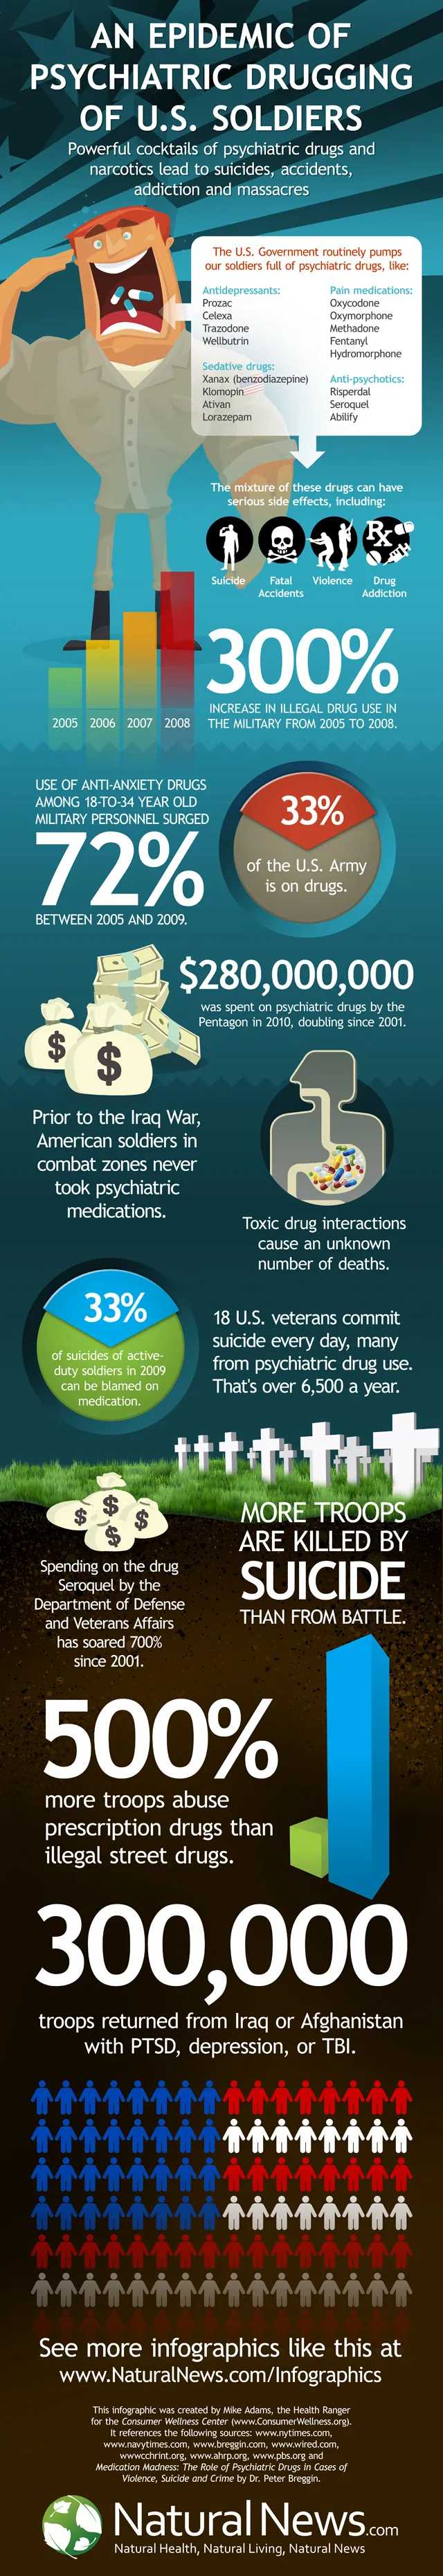 infographic epidemic psychiatric drugging soldiers